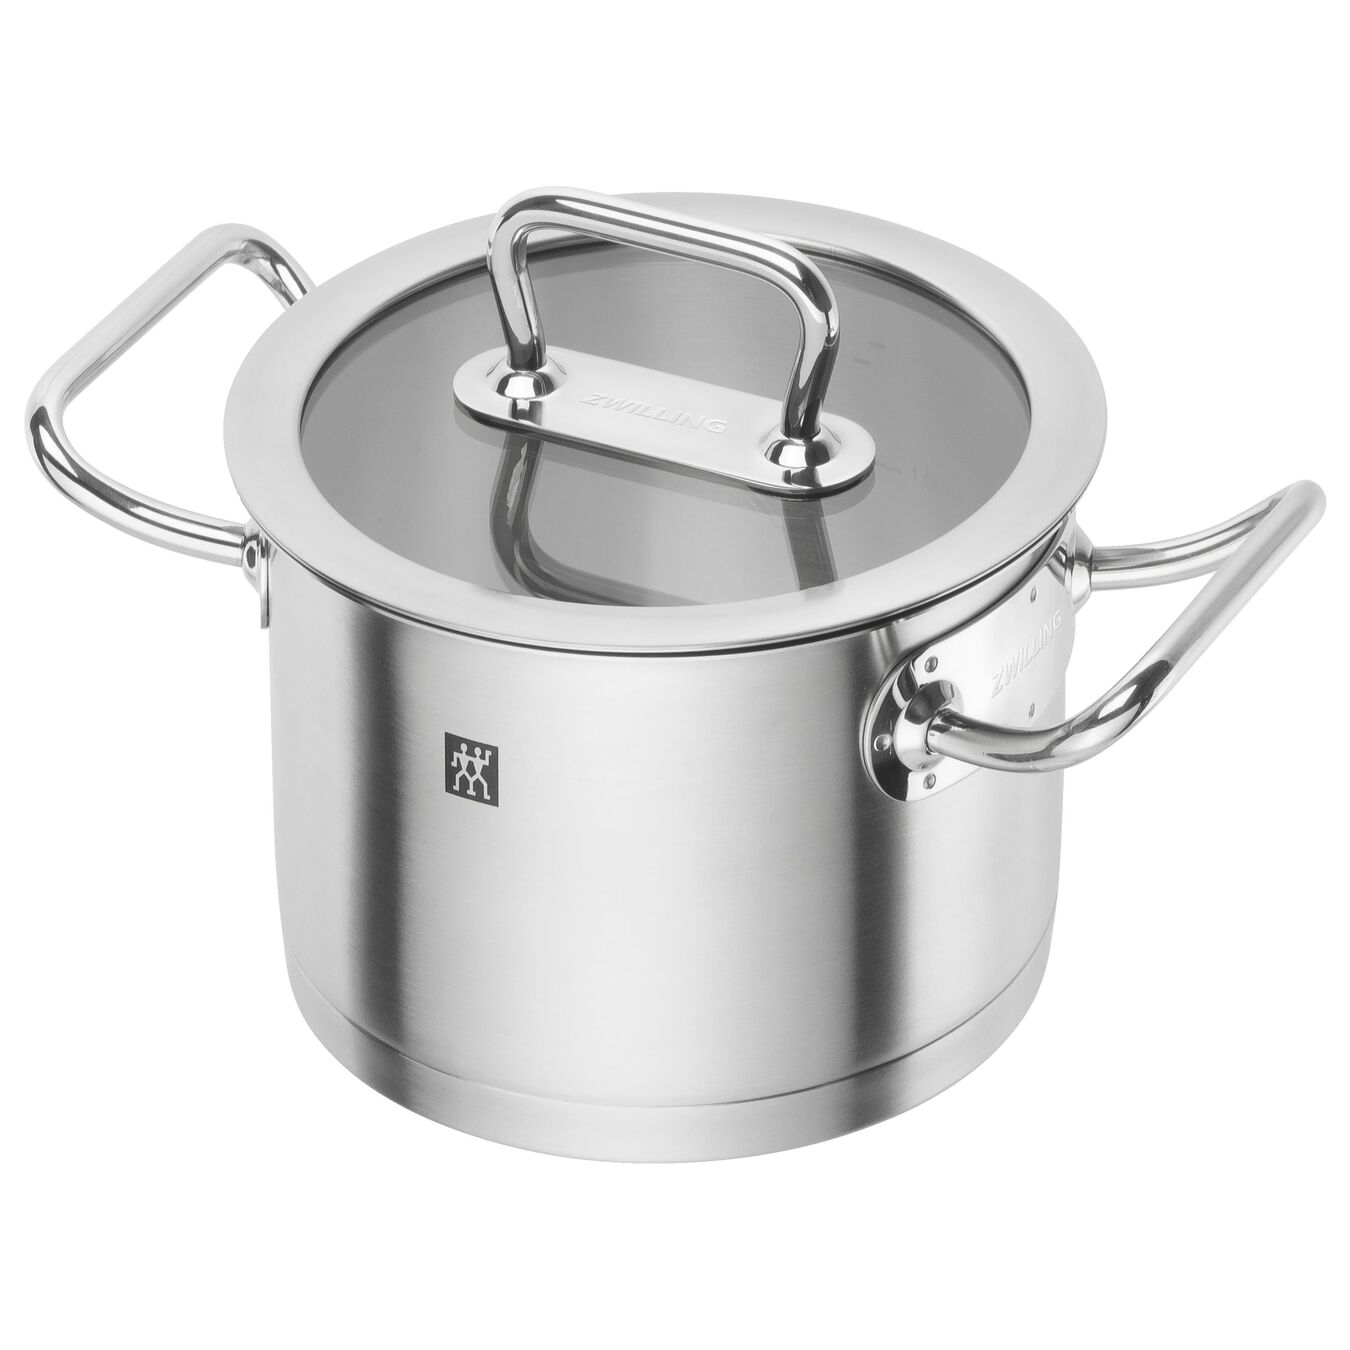 16 cm 18/10 Stainless Steel Stock pot silver,,large 1